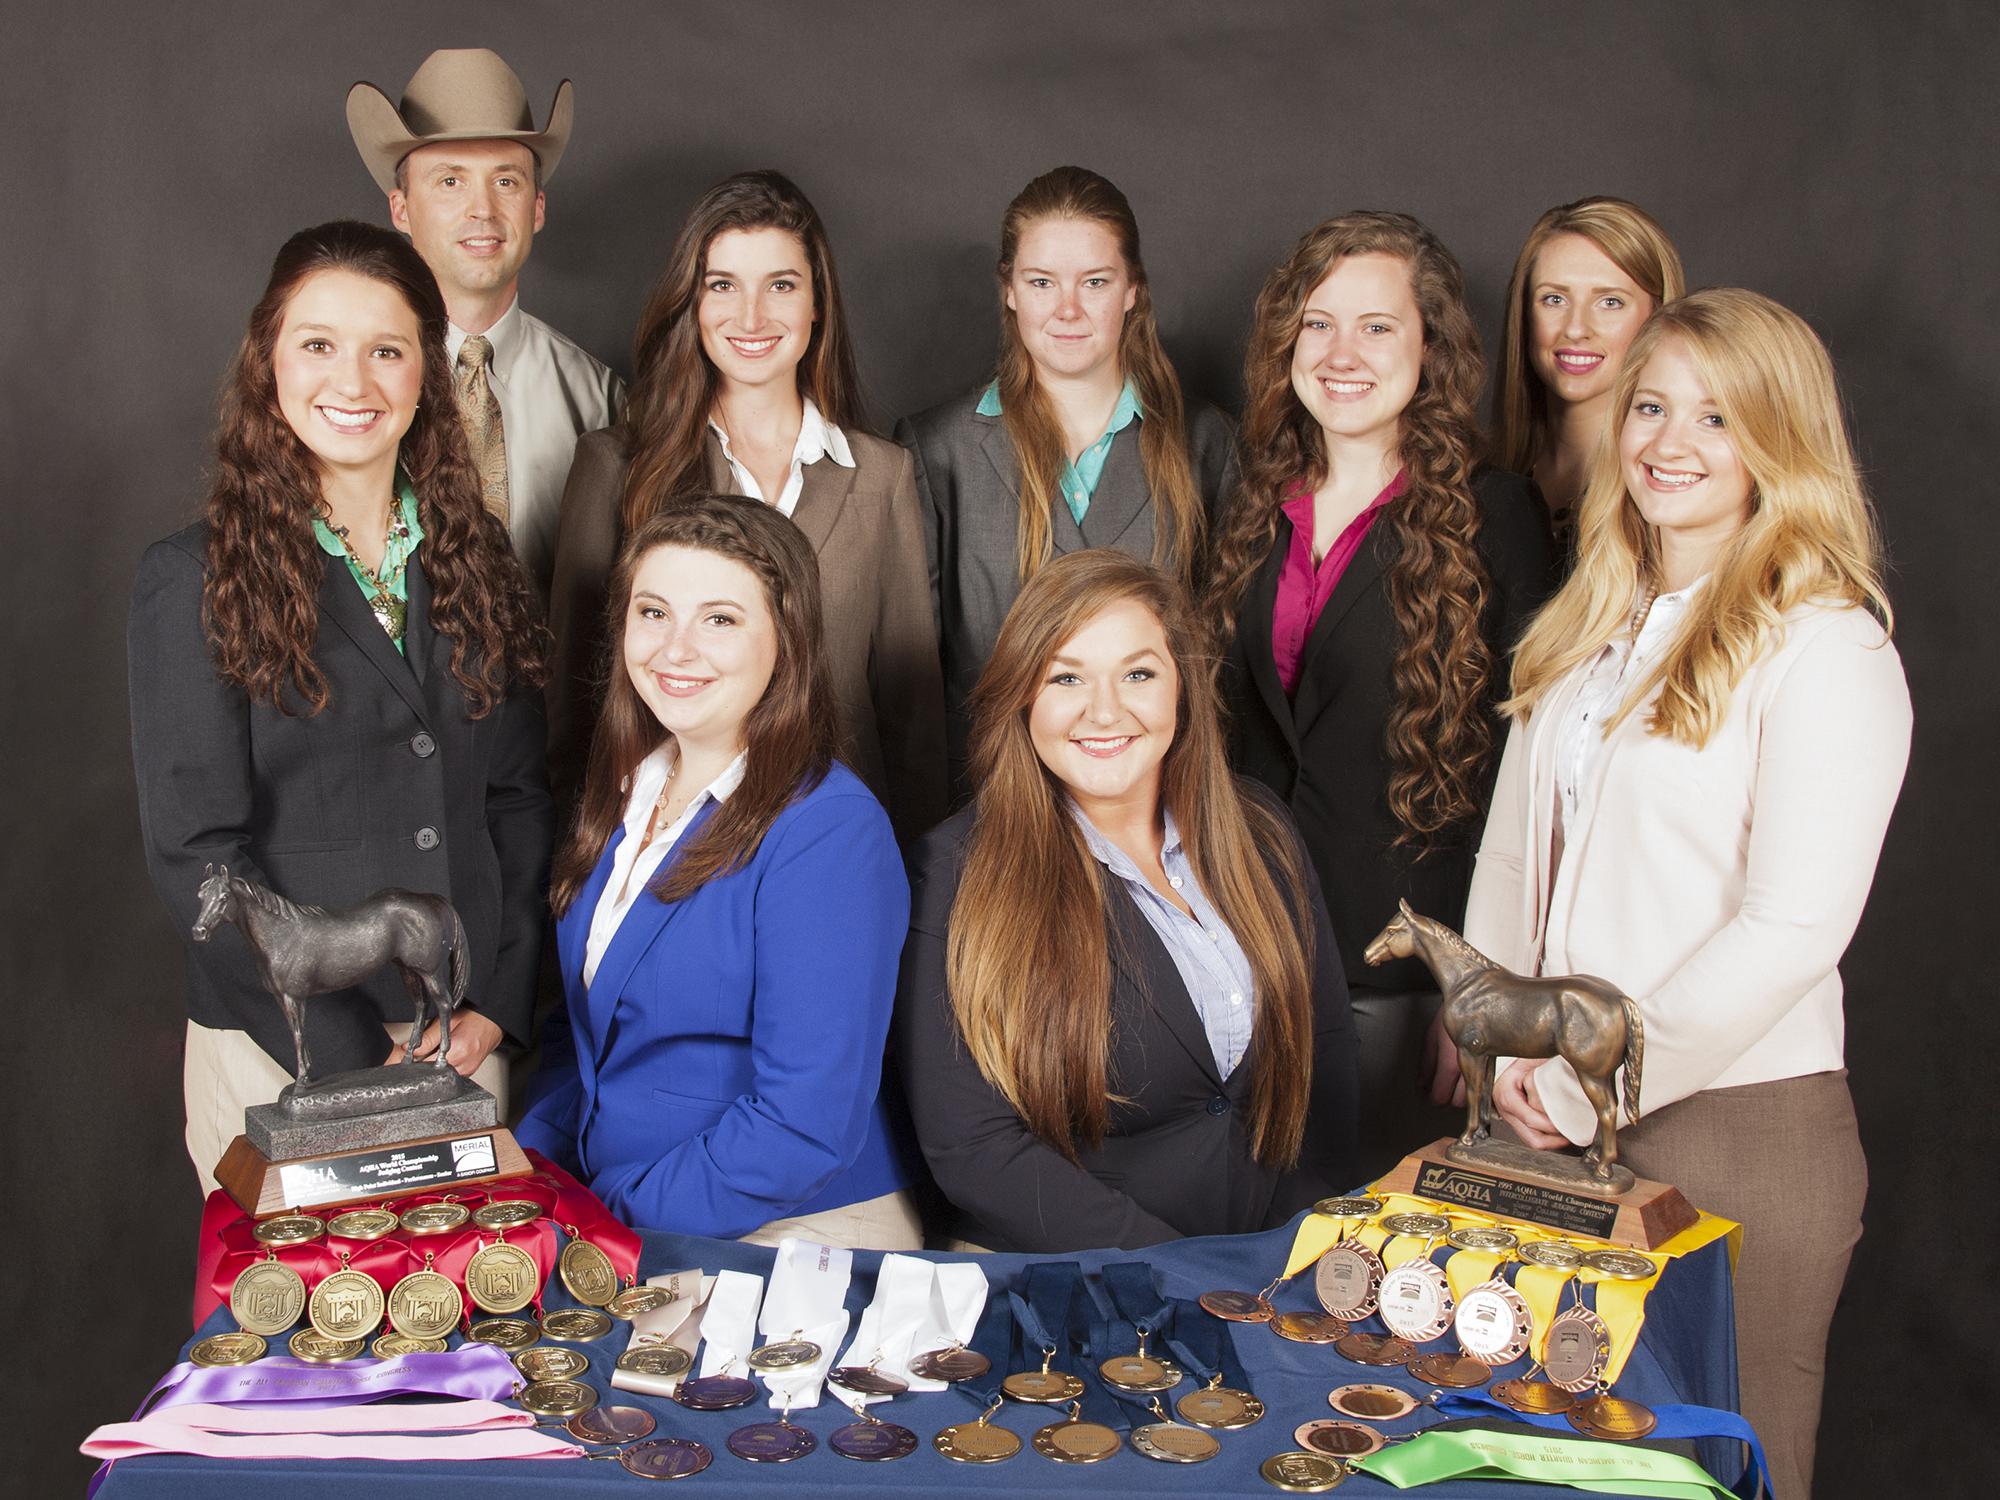 Mississippi State University’s award-winning horse judging team includes (front row, from left) Hannah Collins of Pontotoc; Ashley Greene of Jacksonville, Florida; Carlee West of Brooklyn; Samantha Miller of Birmingham; and (back row, from left) Clay Cavinder, team coach; Hannah Miller of Starkville; Ashley Palmer of Jackson; MaeLena Apperson of Mocksville, North Carolina; and Emily Ferjak, graduate student and assistant coach, from Killingworth, Connecticut. (Photo by MSU Extension Service/Kat Lawrence)